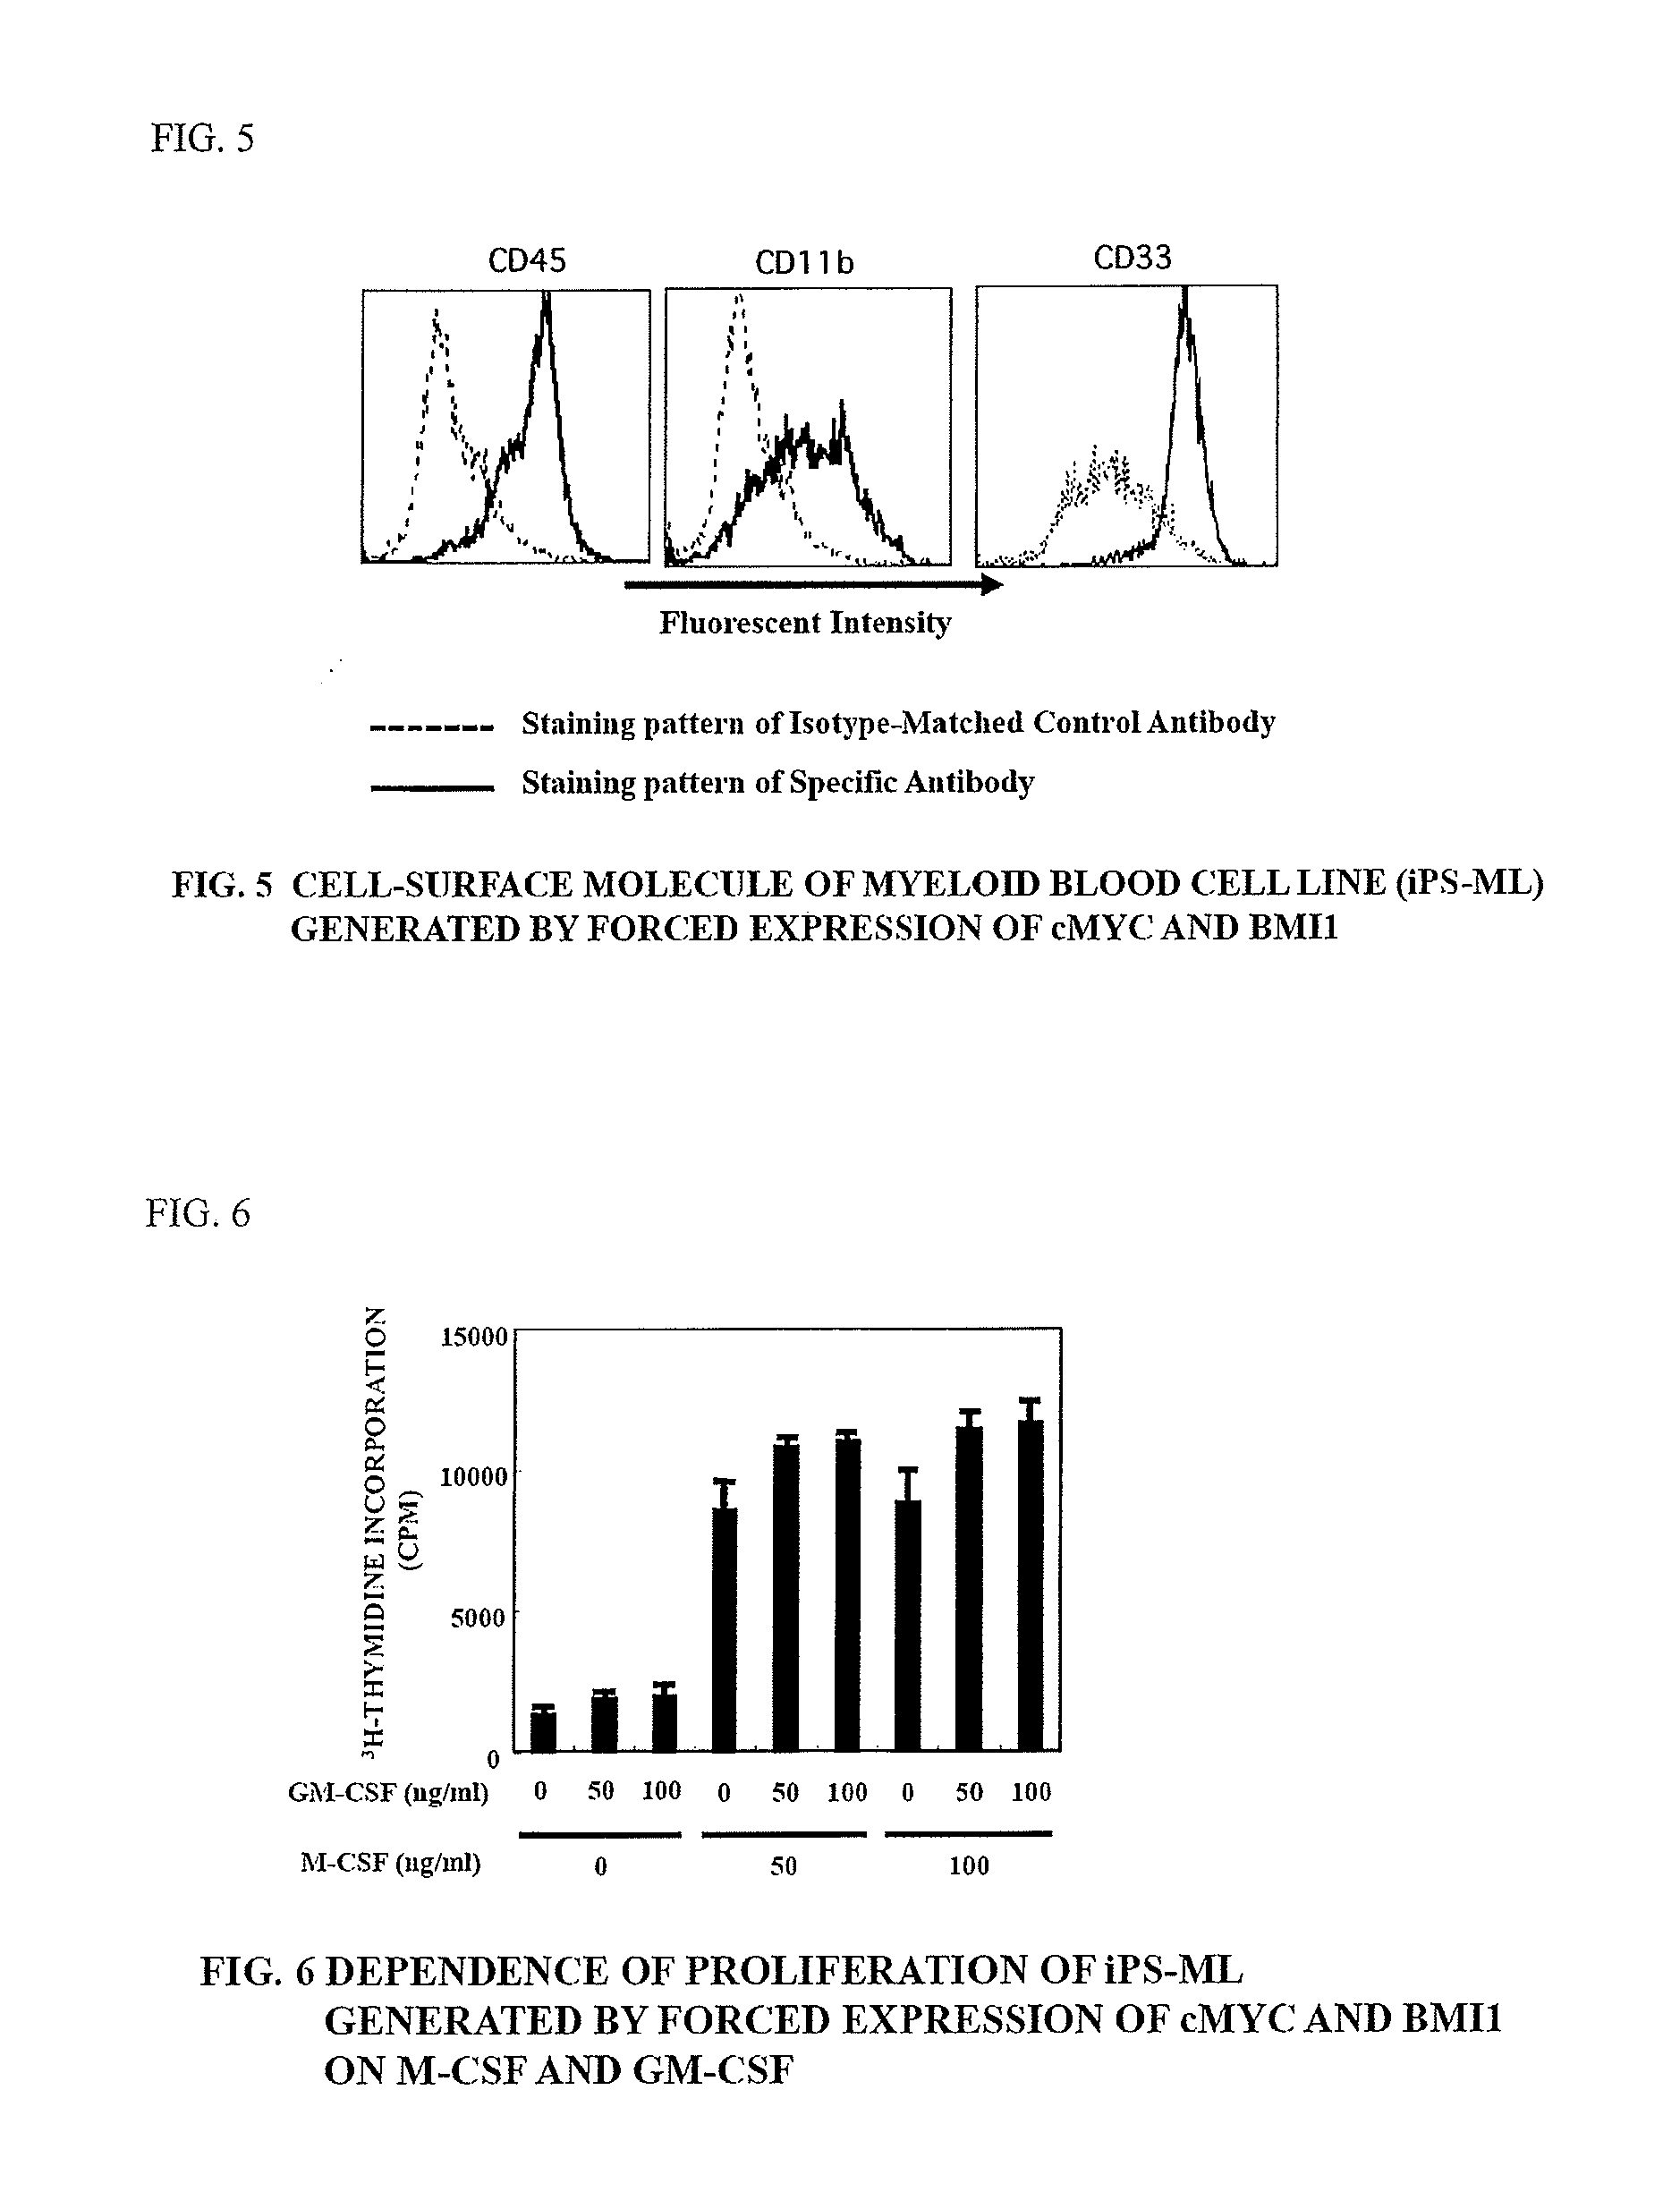 Method of producing myeloid blood cells